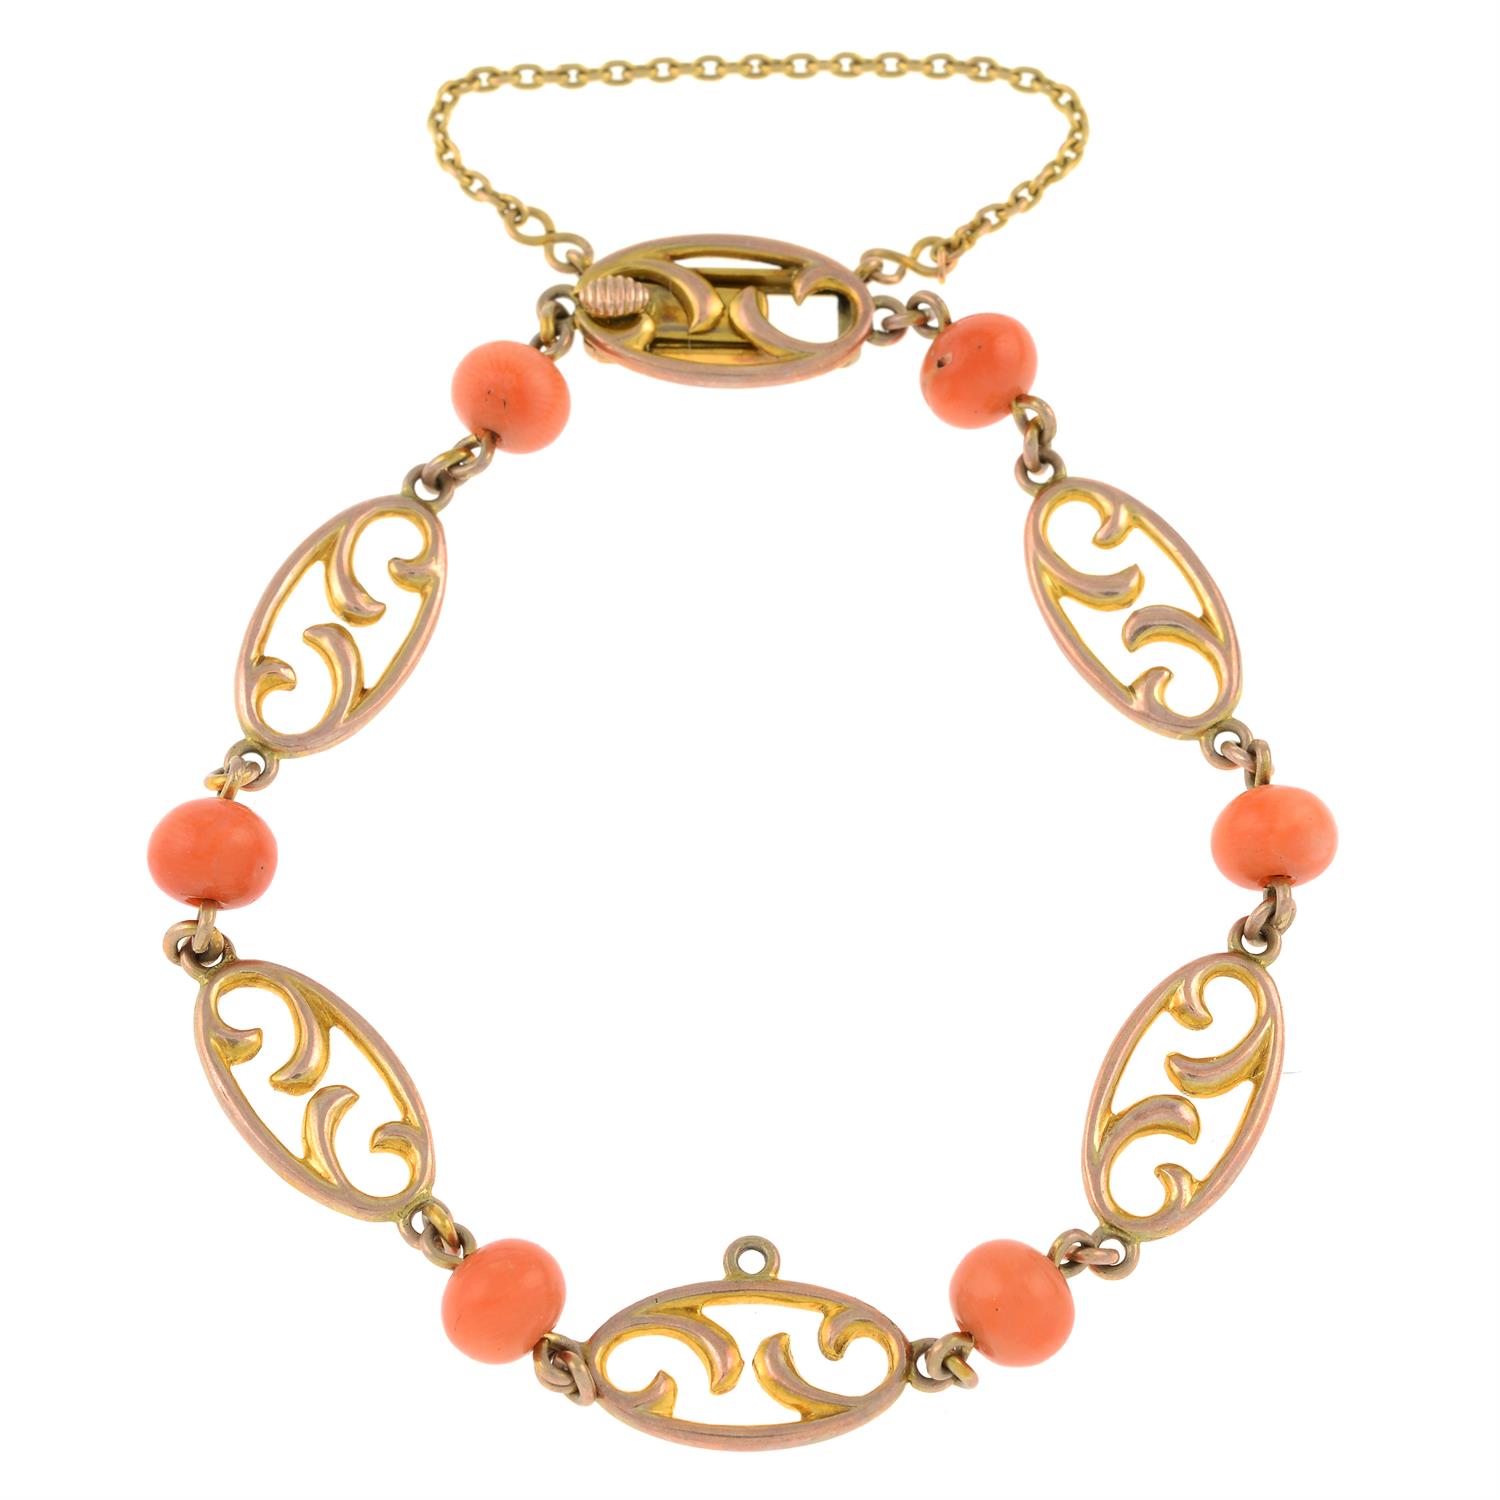 An early 20th century 9ct gold openwork link bracelet, with coral spacers.